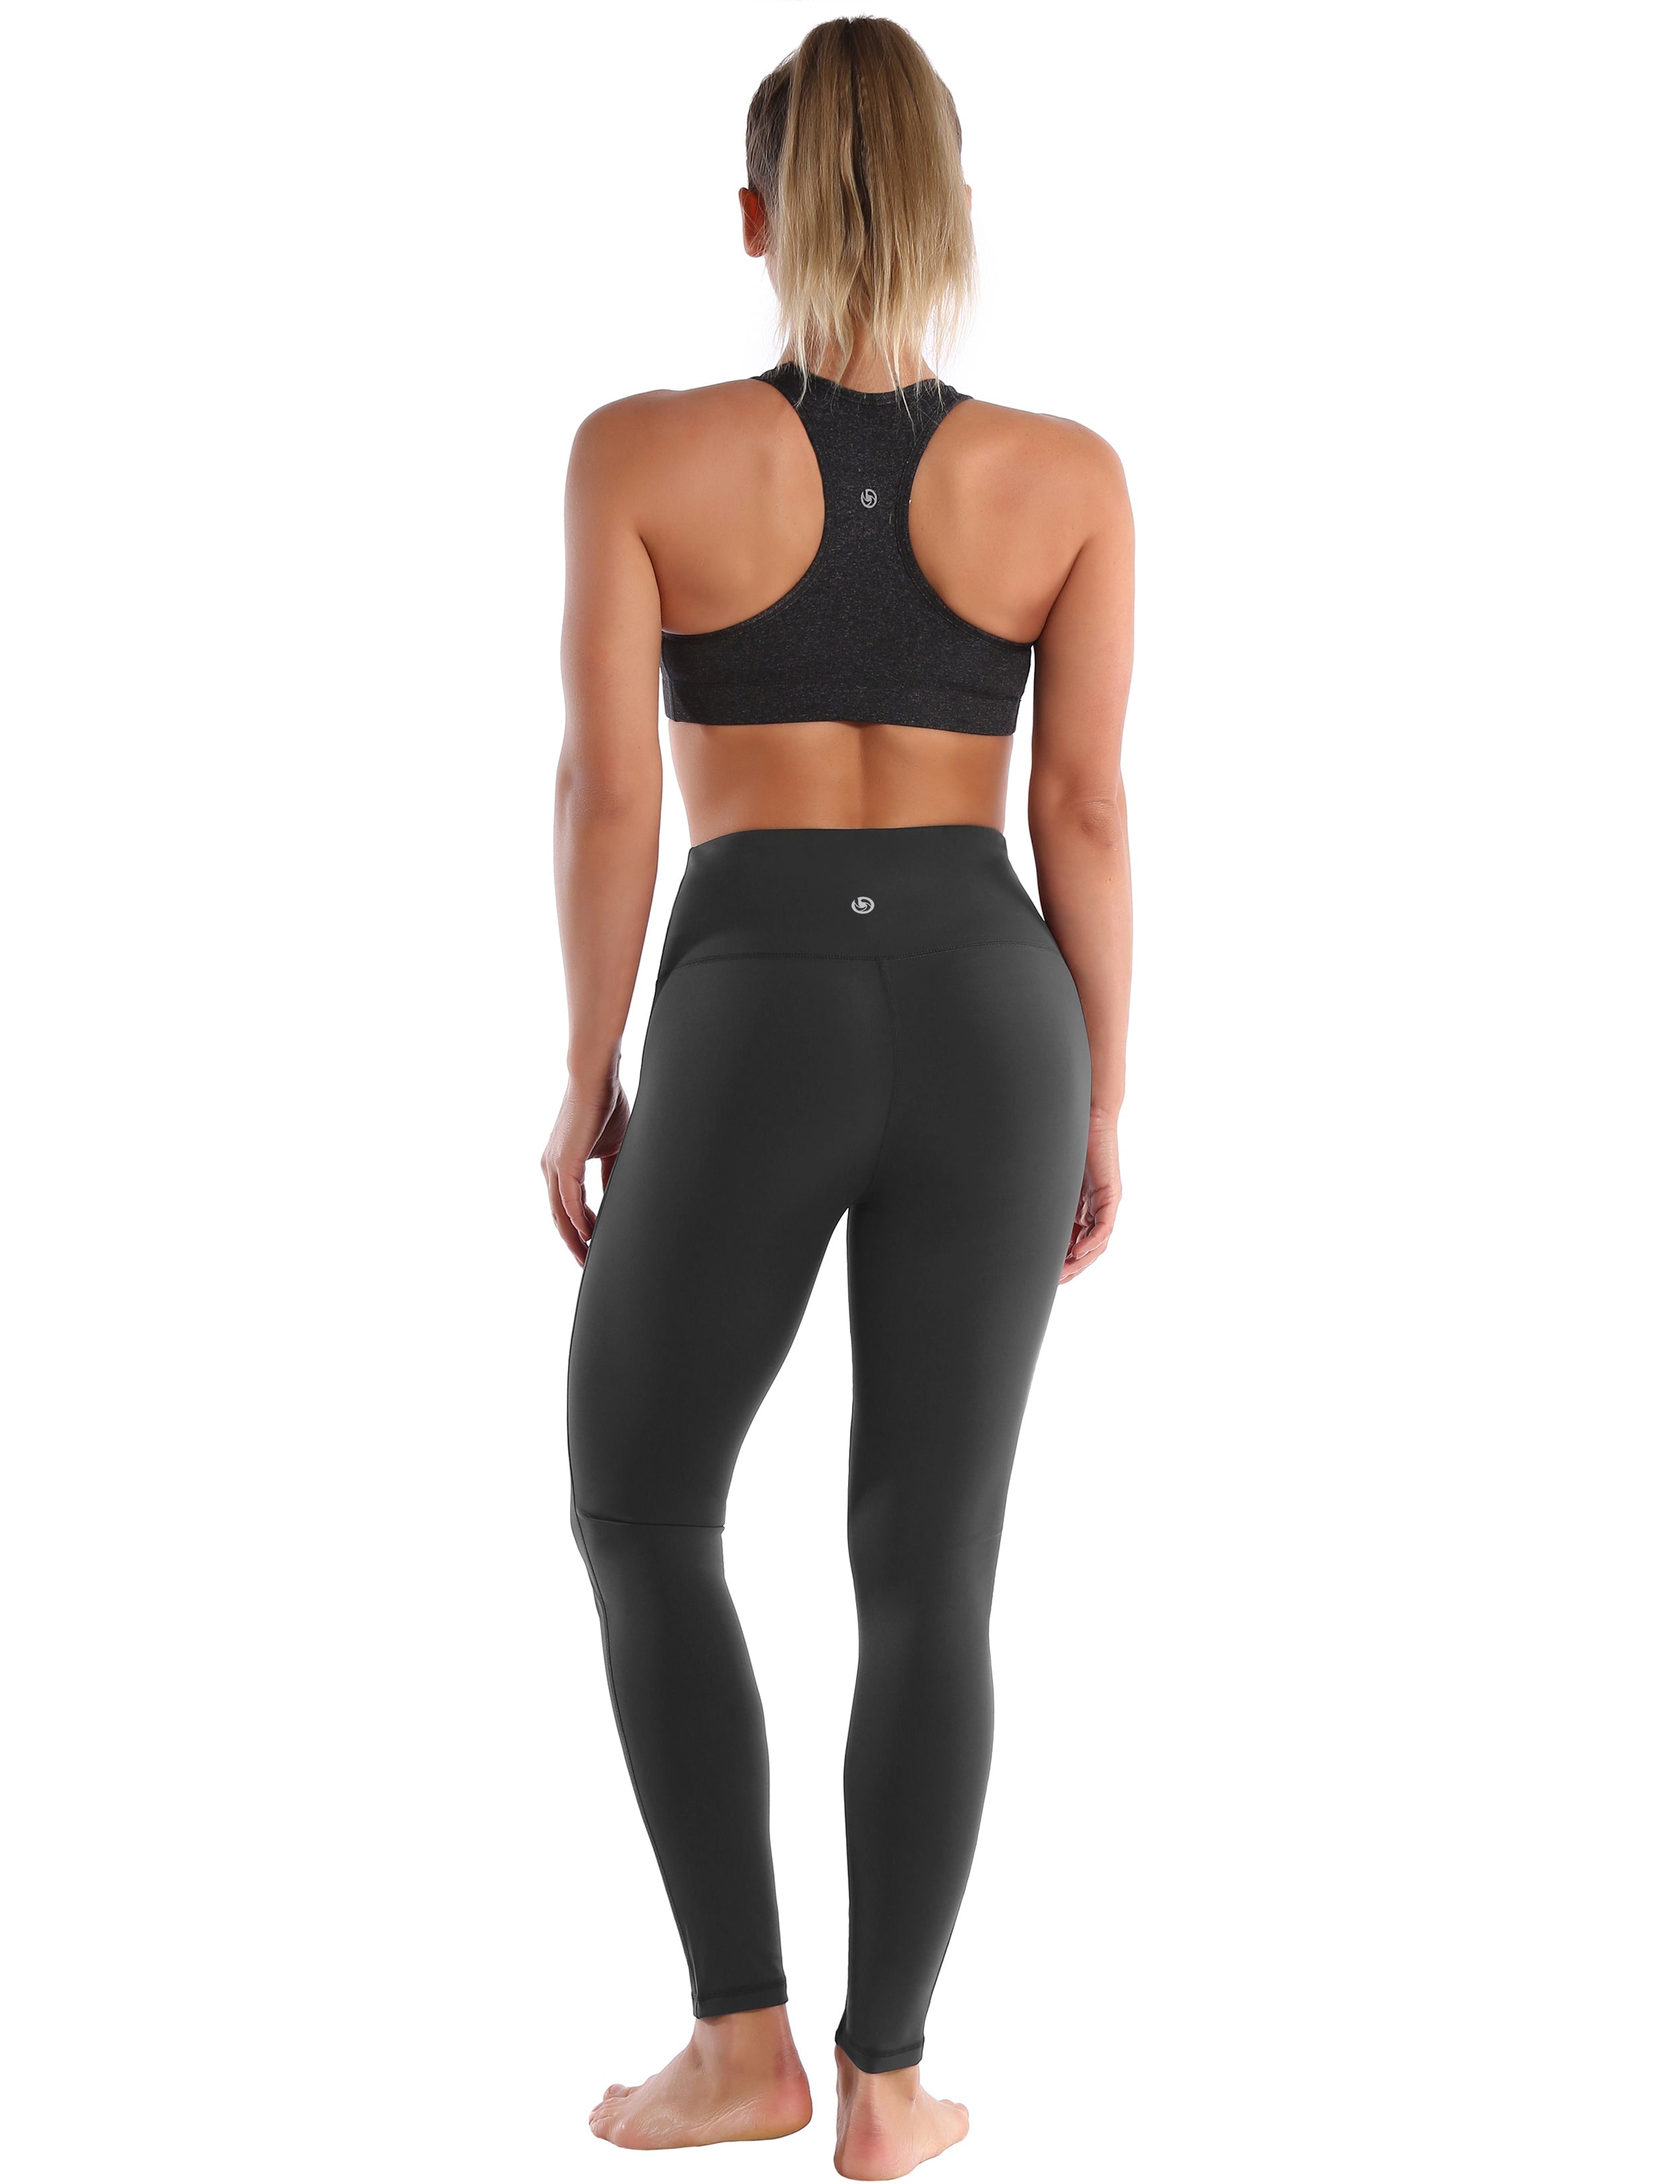 High Waist Side Line Pilates Pants shadowcharcoal Side Line is Make Your Legs Look Longer and Thinner 75%Nylon/25%Spandex Fabric doesn't attract lint easily 4-way stretch No see-through Moisture-wicking Tummy control Inner pocket Two lengths